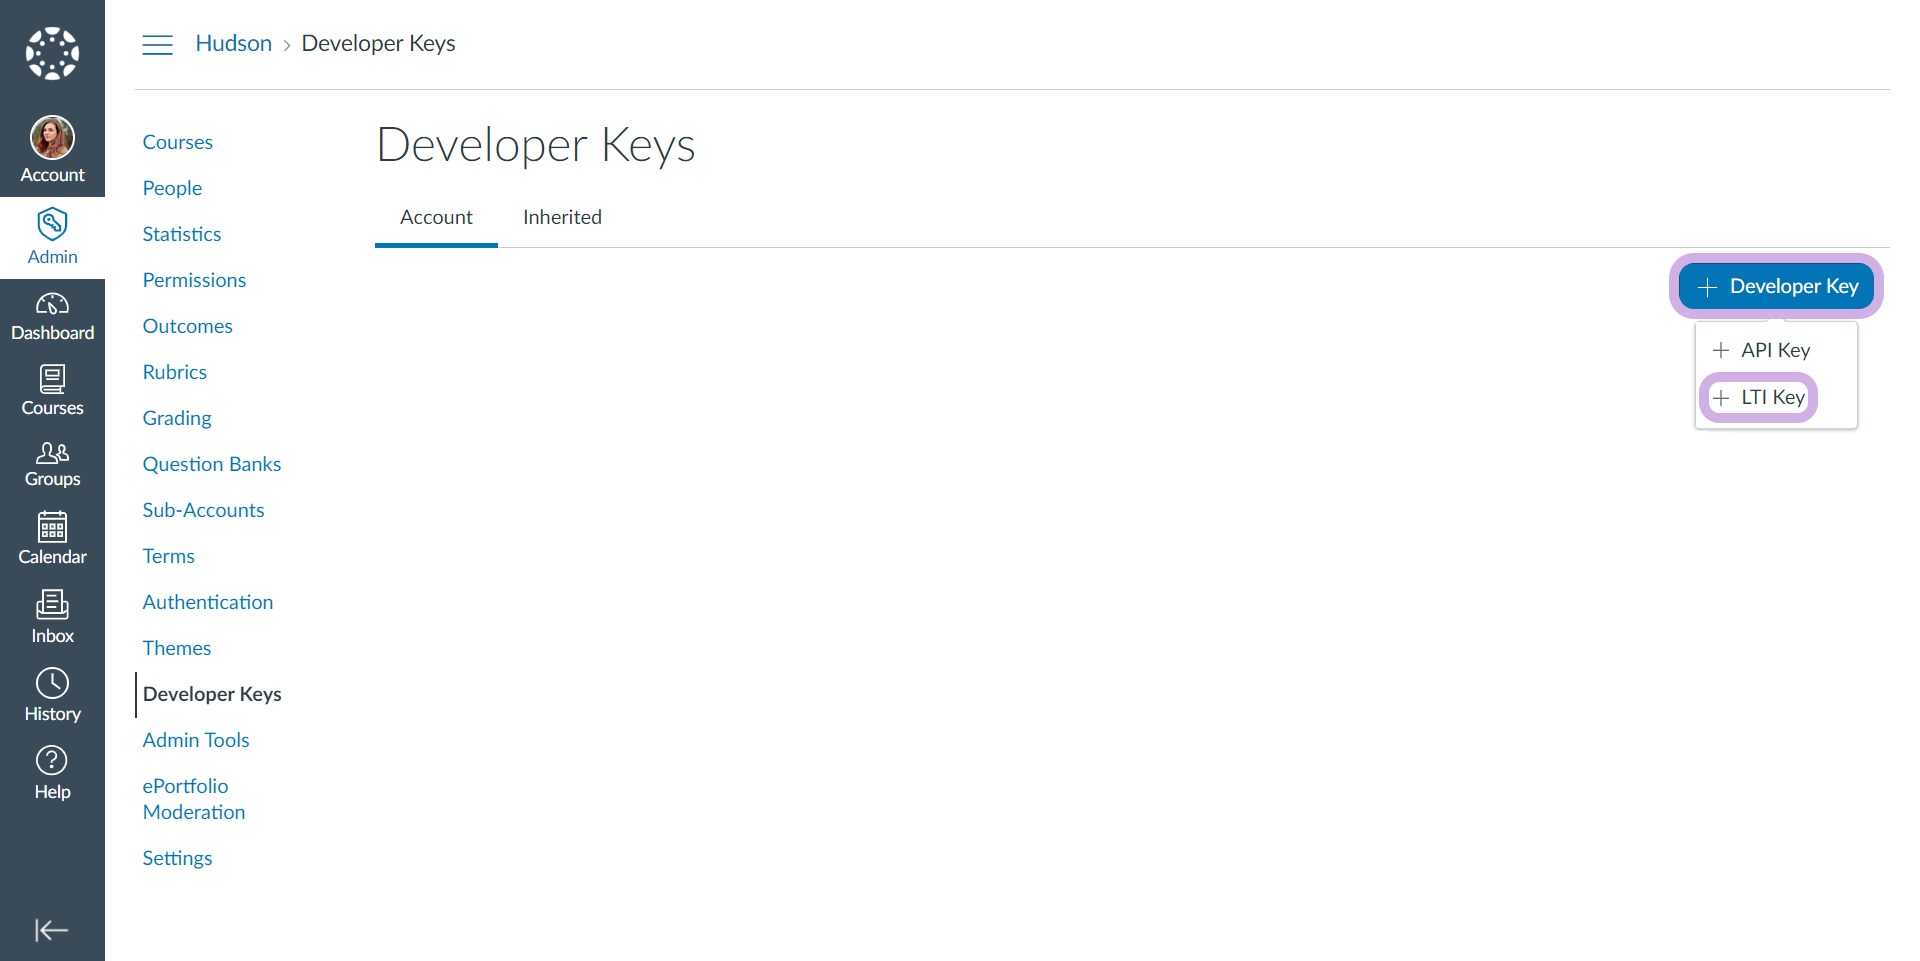 The + Developer Key button is slected and LTI Key is highlighted from the drop-down menu.